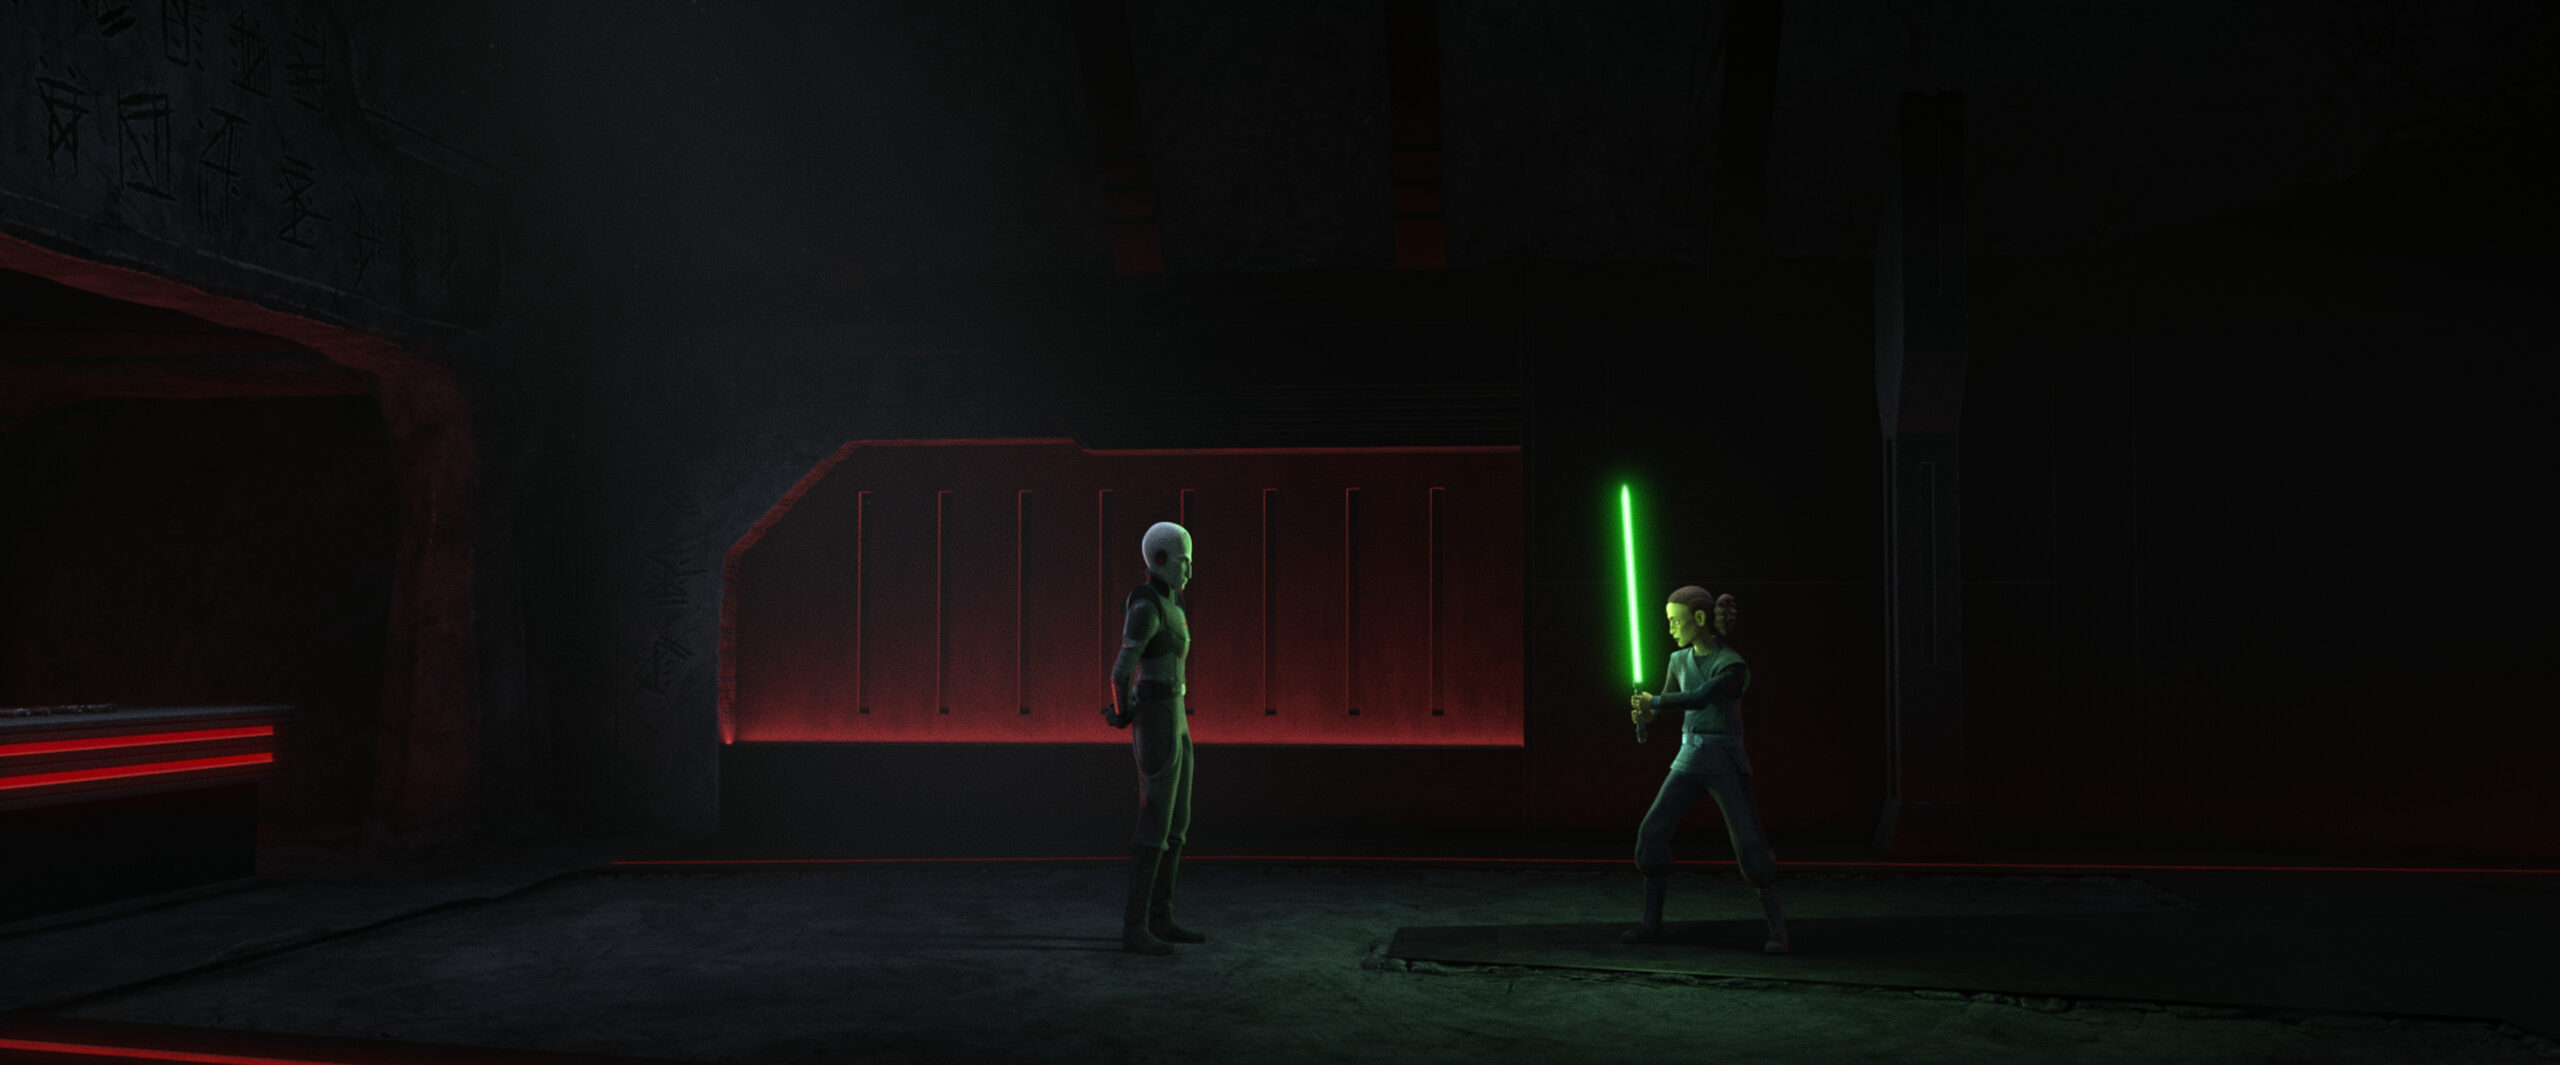 (L-R): Grand Inquisitor and Barriss Offee in a scene from "STAR WARS: TALES OF THE EMPIRE", exclusively on Disney+. © 2024 Lucasfilm Ltd. & ™. All Rights Reserved.